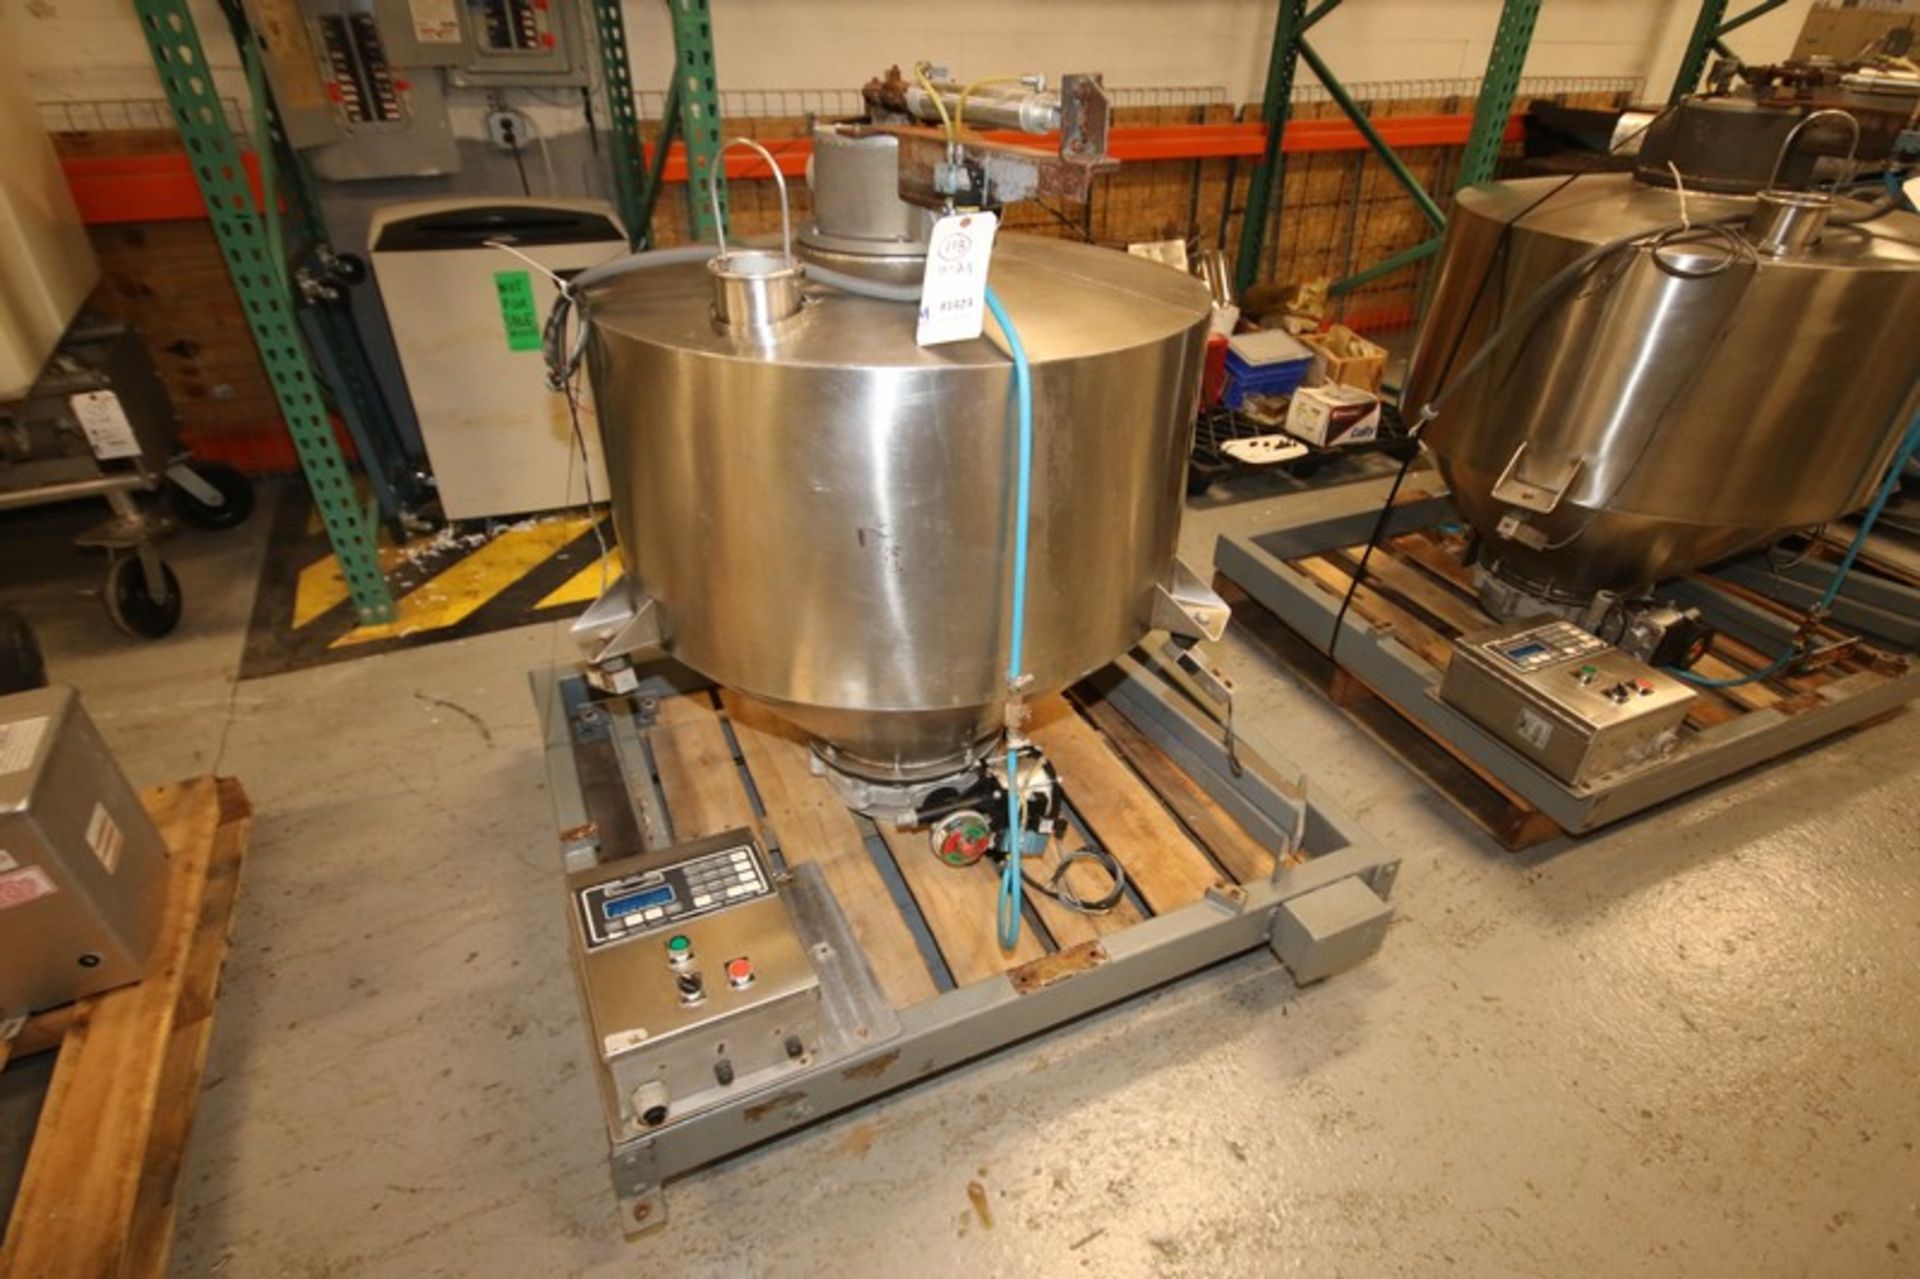 36"W x 32"H Cone Bottom S/S Powder Hopper, with Load Cells, Pneumatic Top & Bottom Valve with - Image 3 of 3